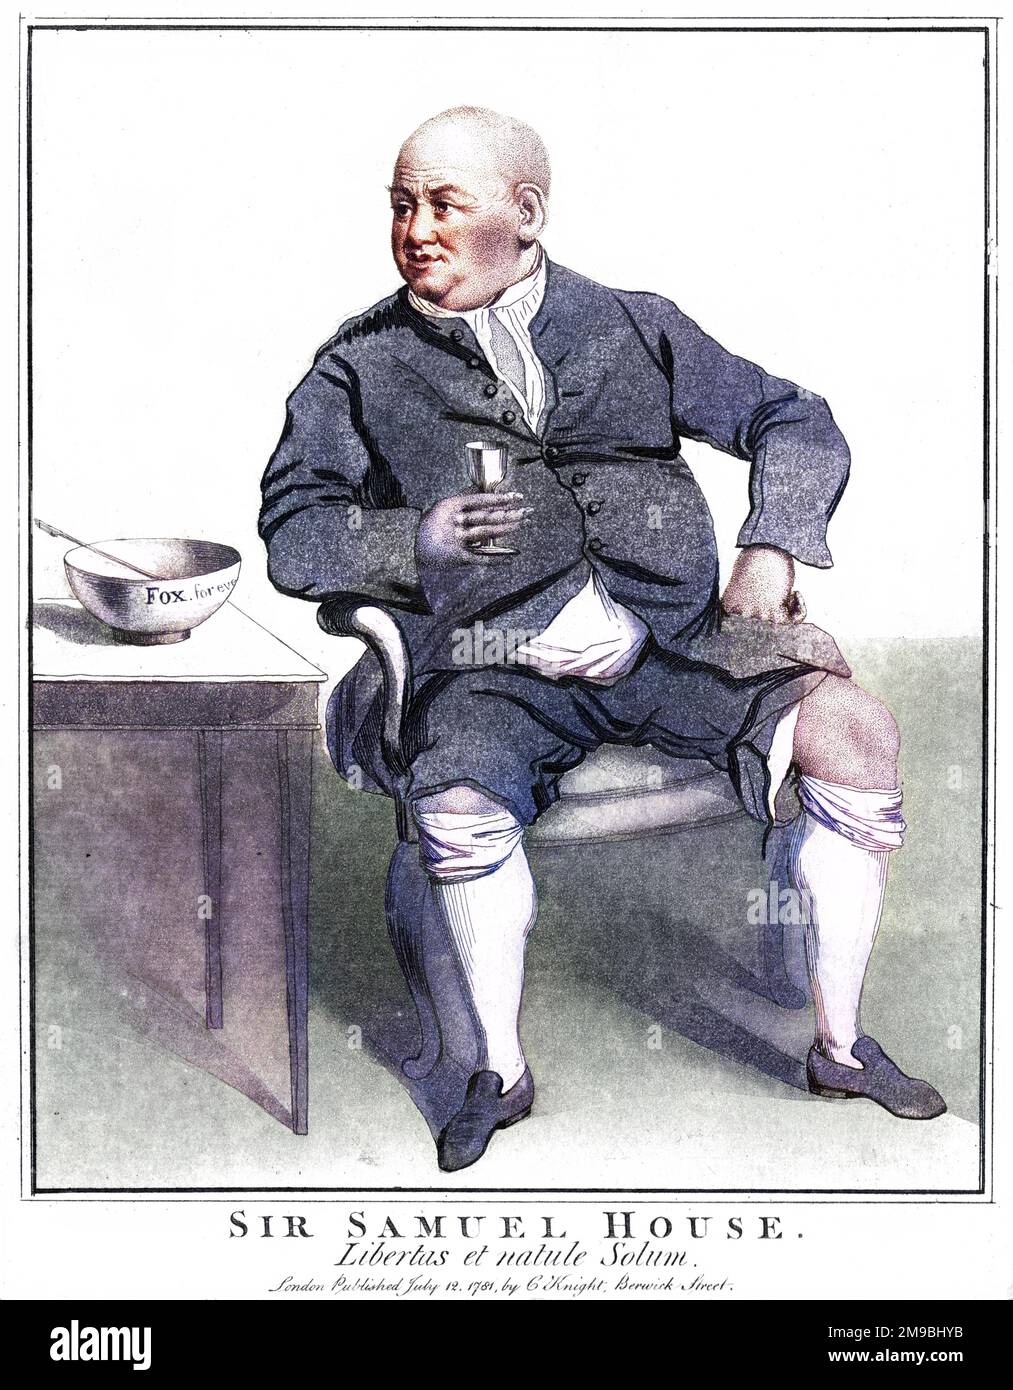 SAMUEL HOUSE London innkeeper whose political support for Charles James Fox is evident from the wine bowl labelled 'Fox' and the glass in his hand. Stock Photo